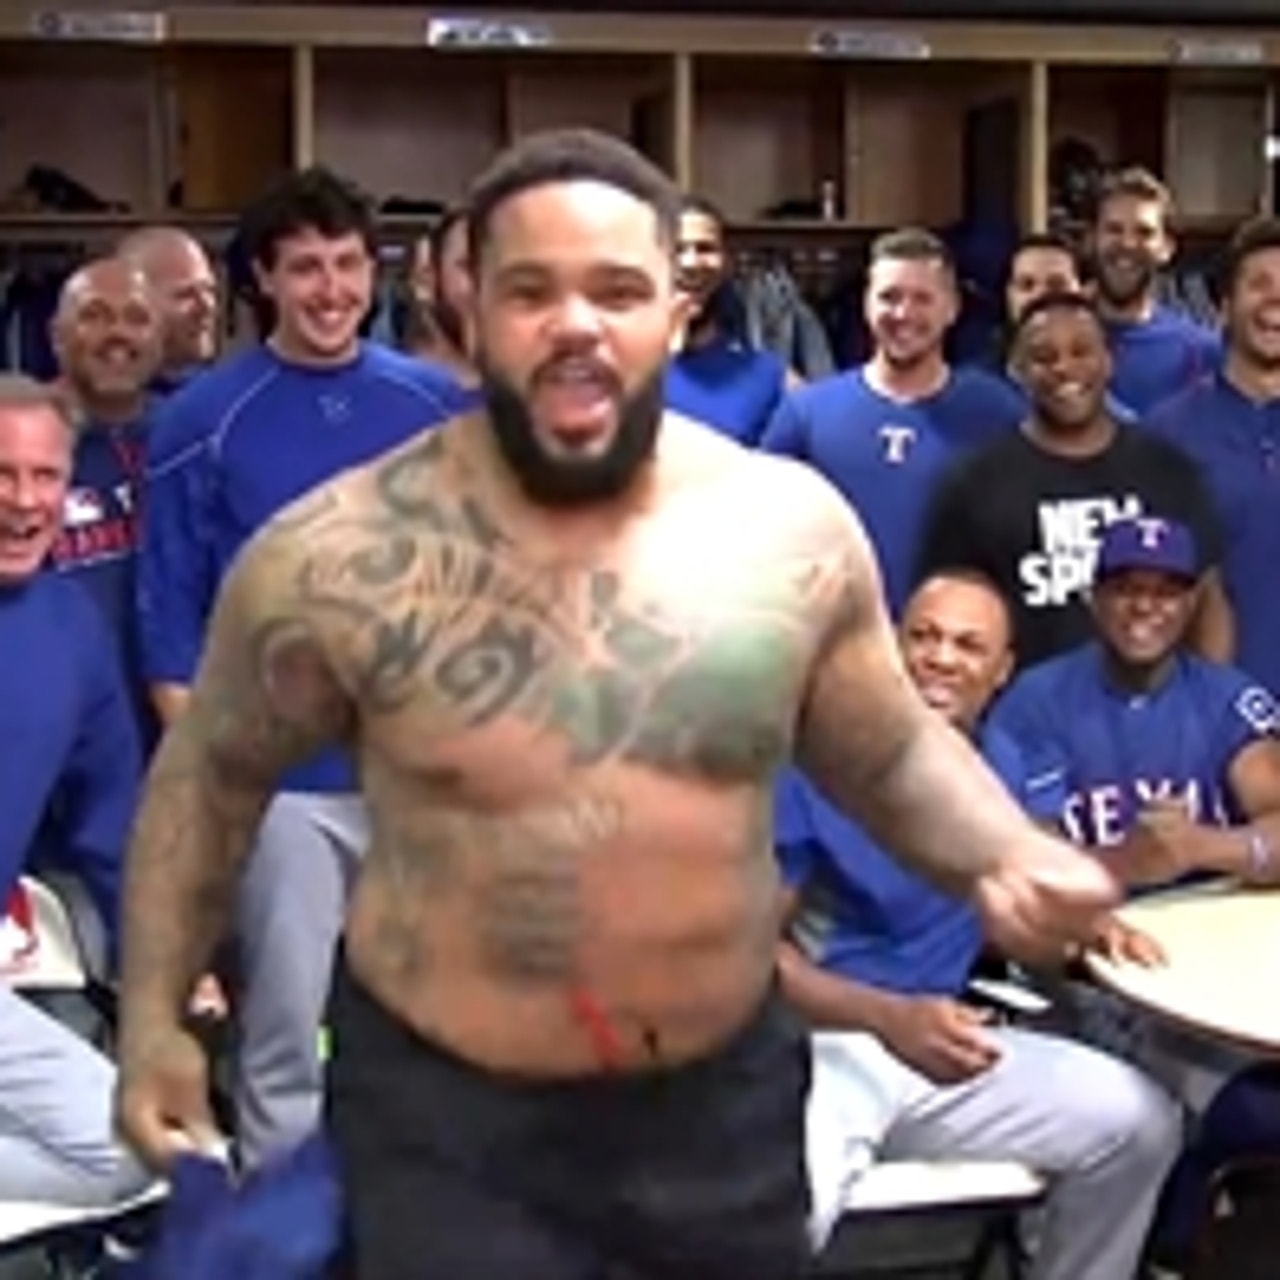 Prince Fielder rips his shirt off and goes nuts to pump up the Mavs